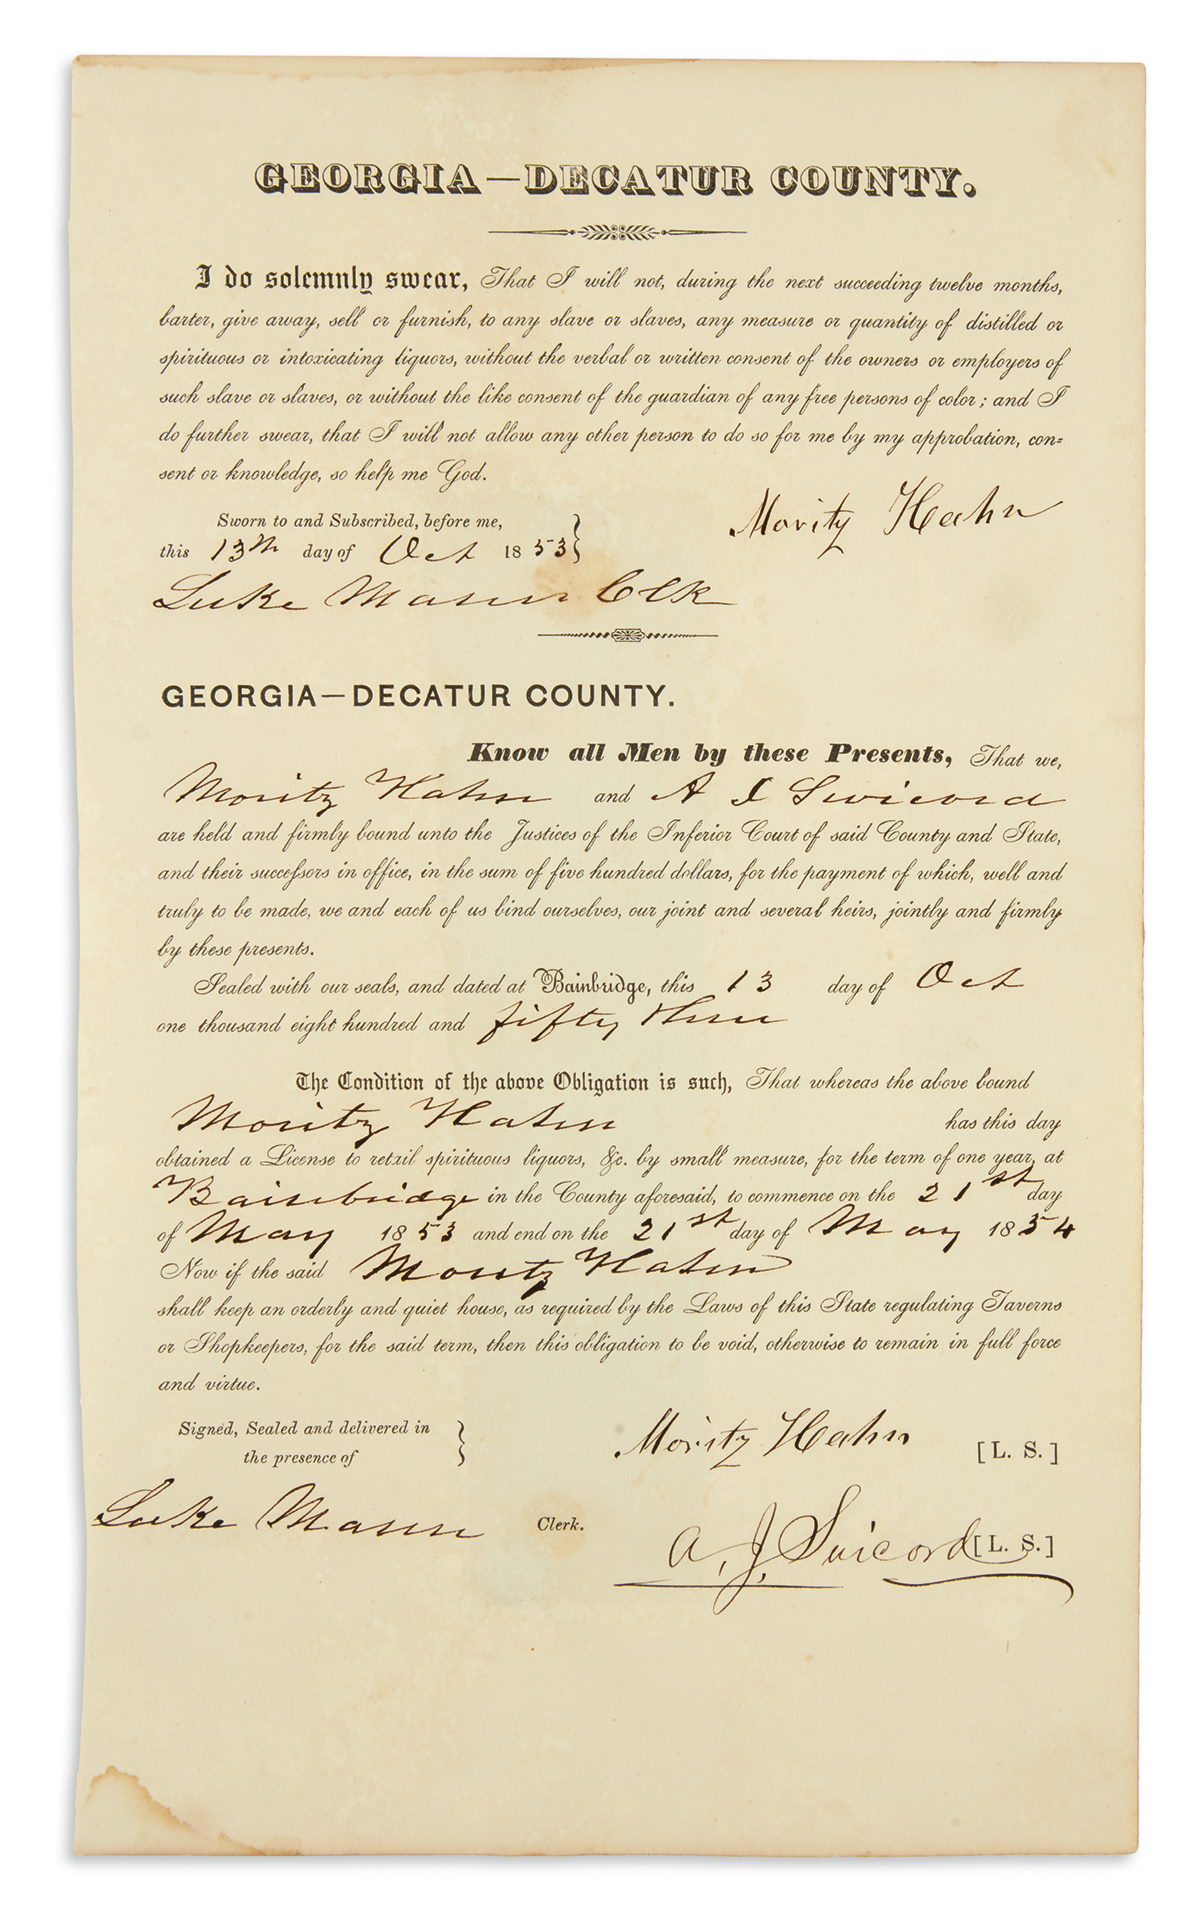 (SLAVERY AND ABOLITION.) Georgia tavern license forbidding sales to any slave or slaves.